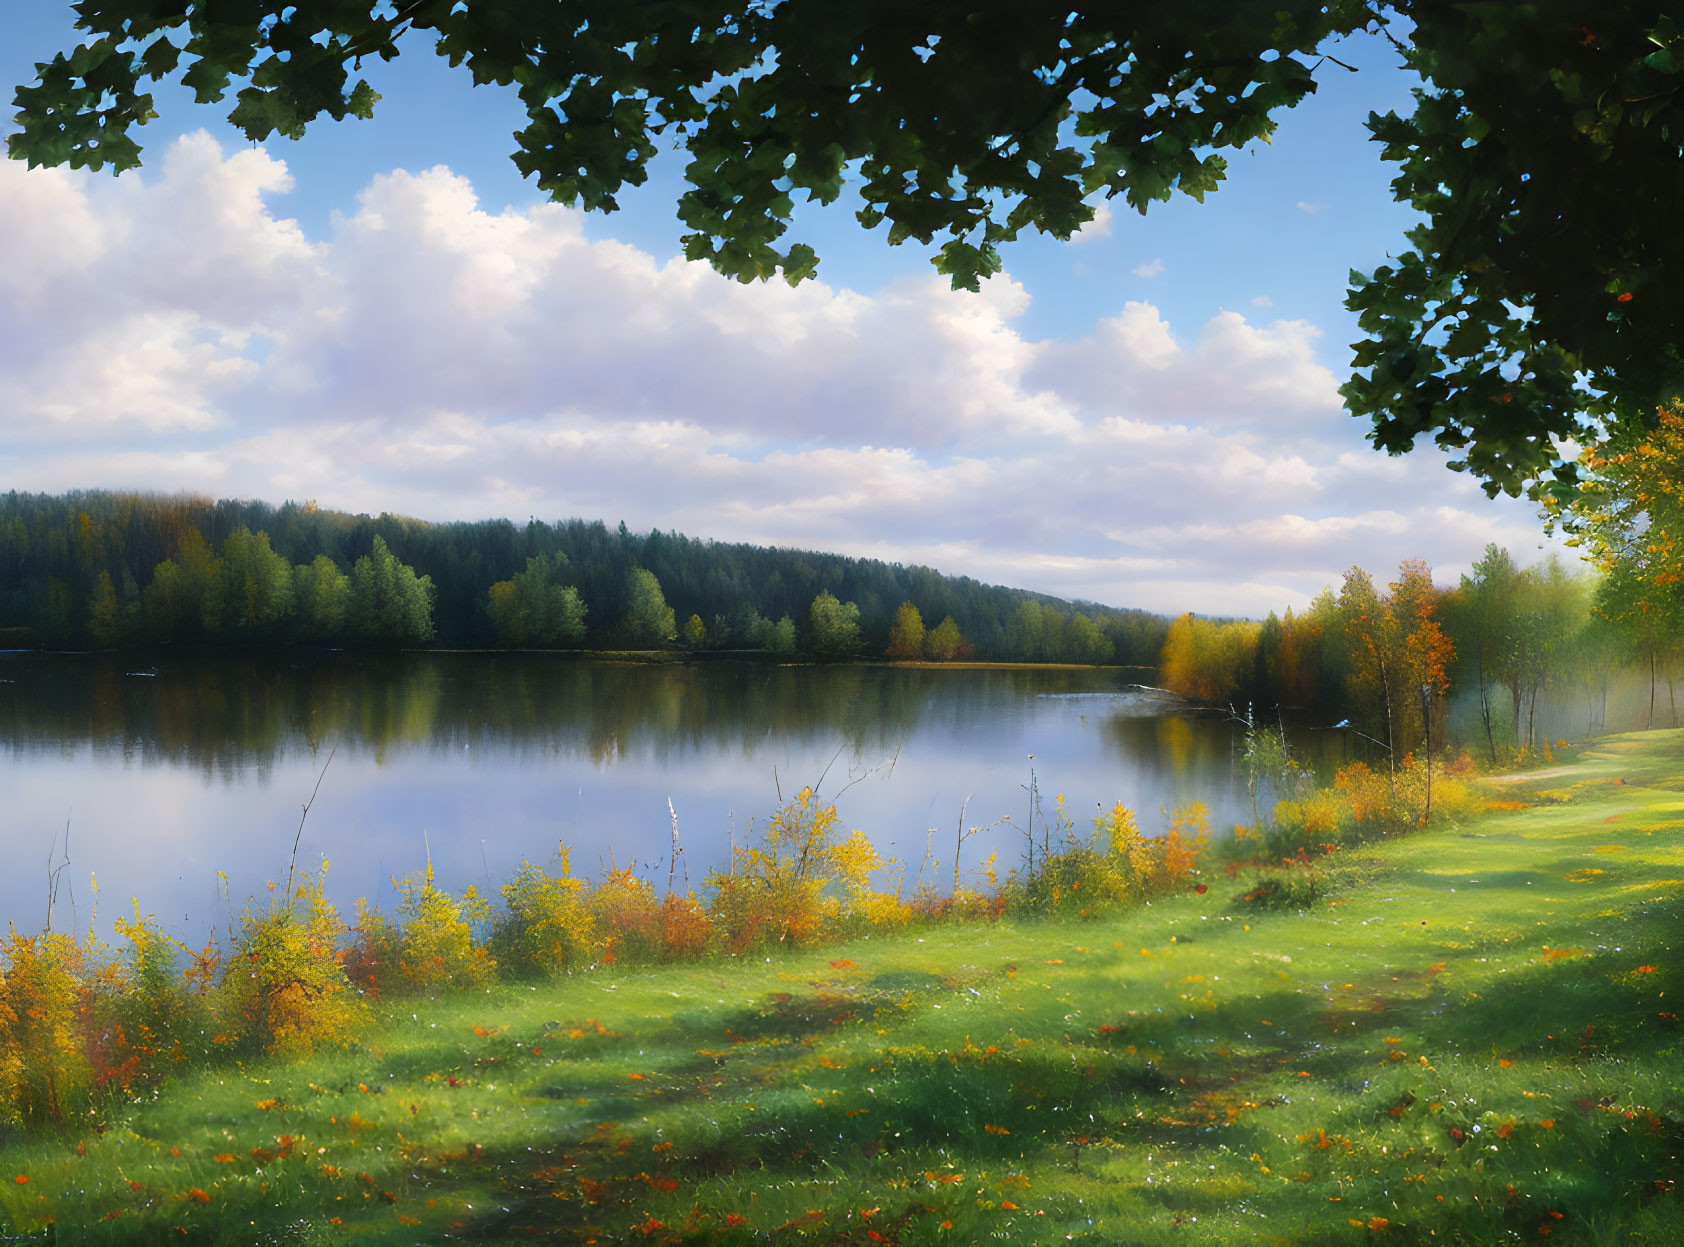 Tranquil lake with lush forest under partly cloudy sky